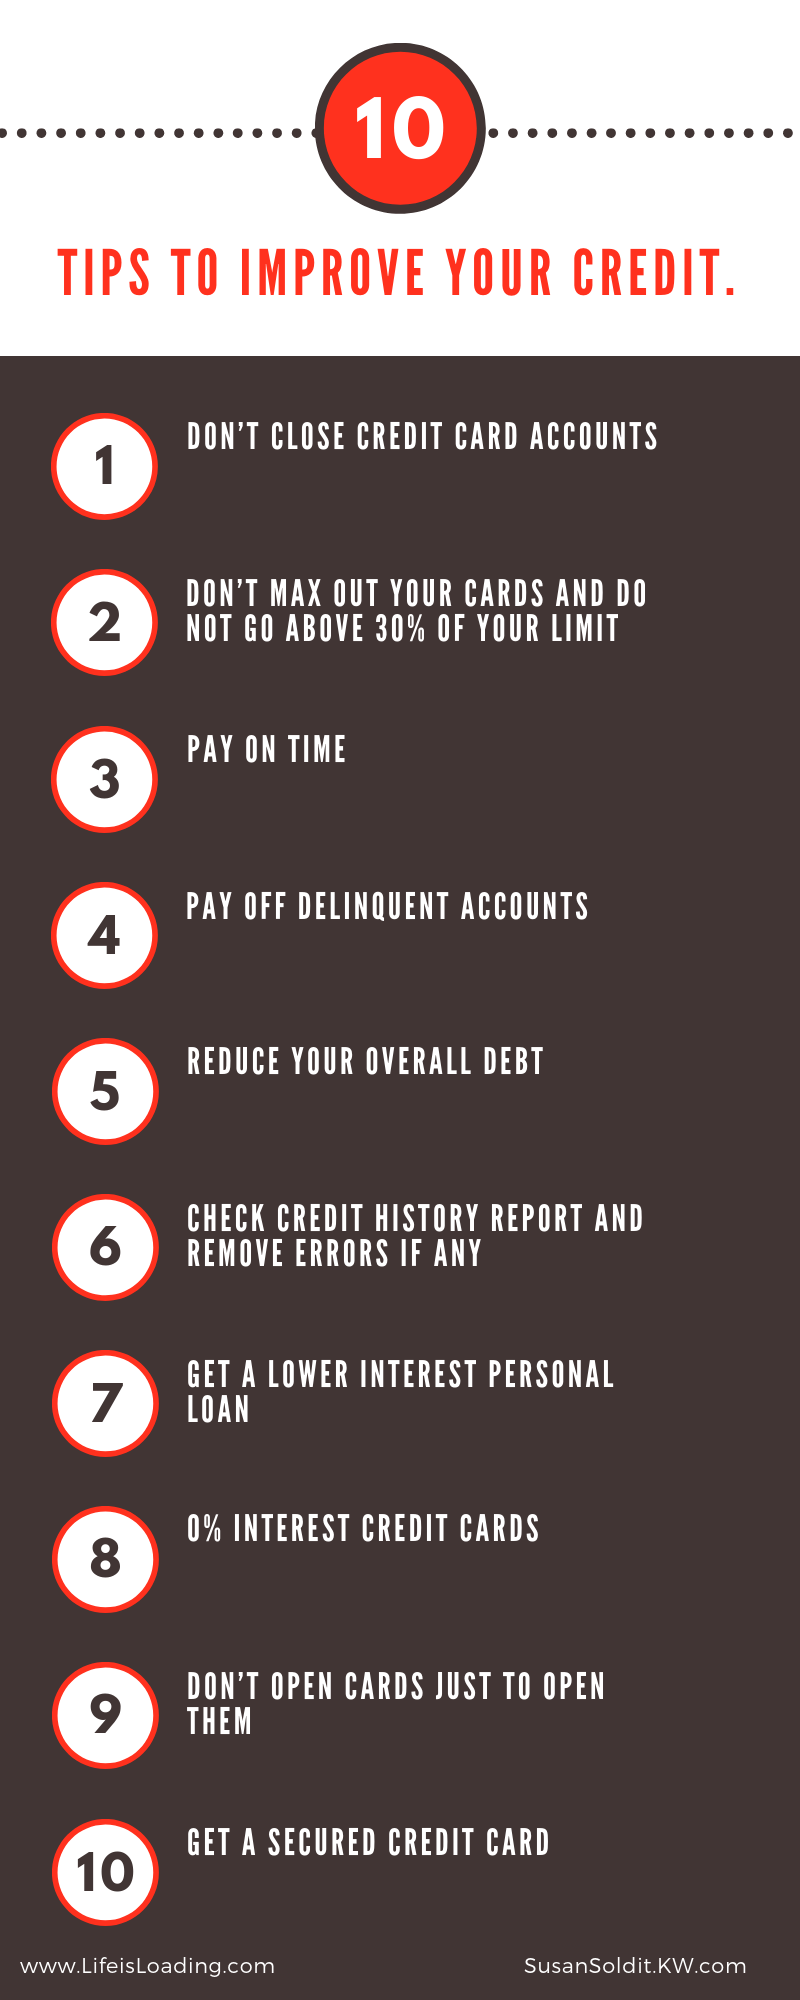 tips to improve your credit. (2).png